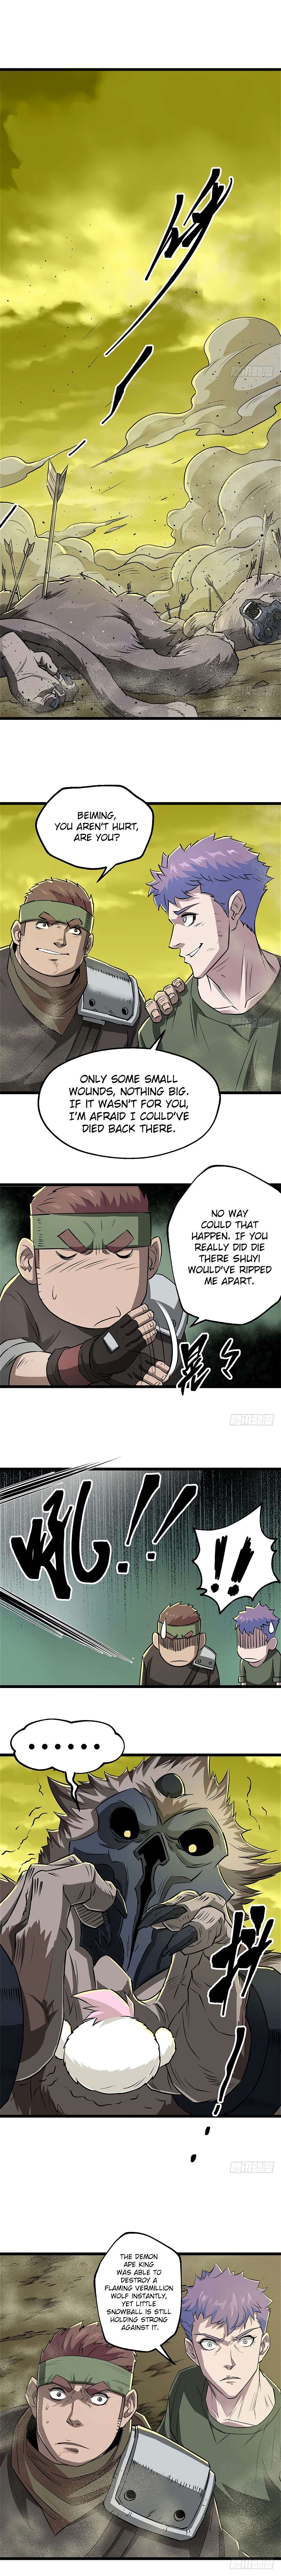 The Hunter Chapter 15 page 4